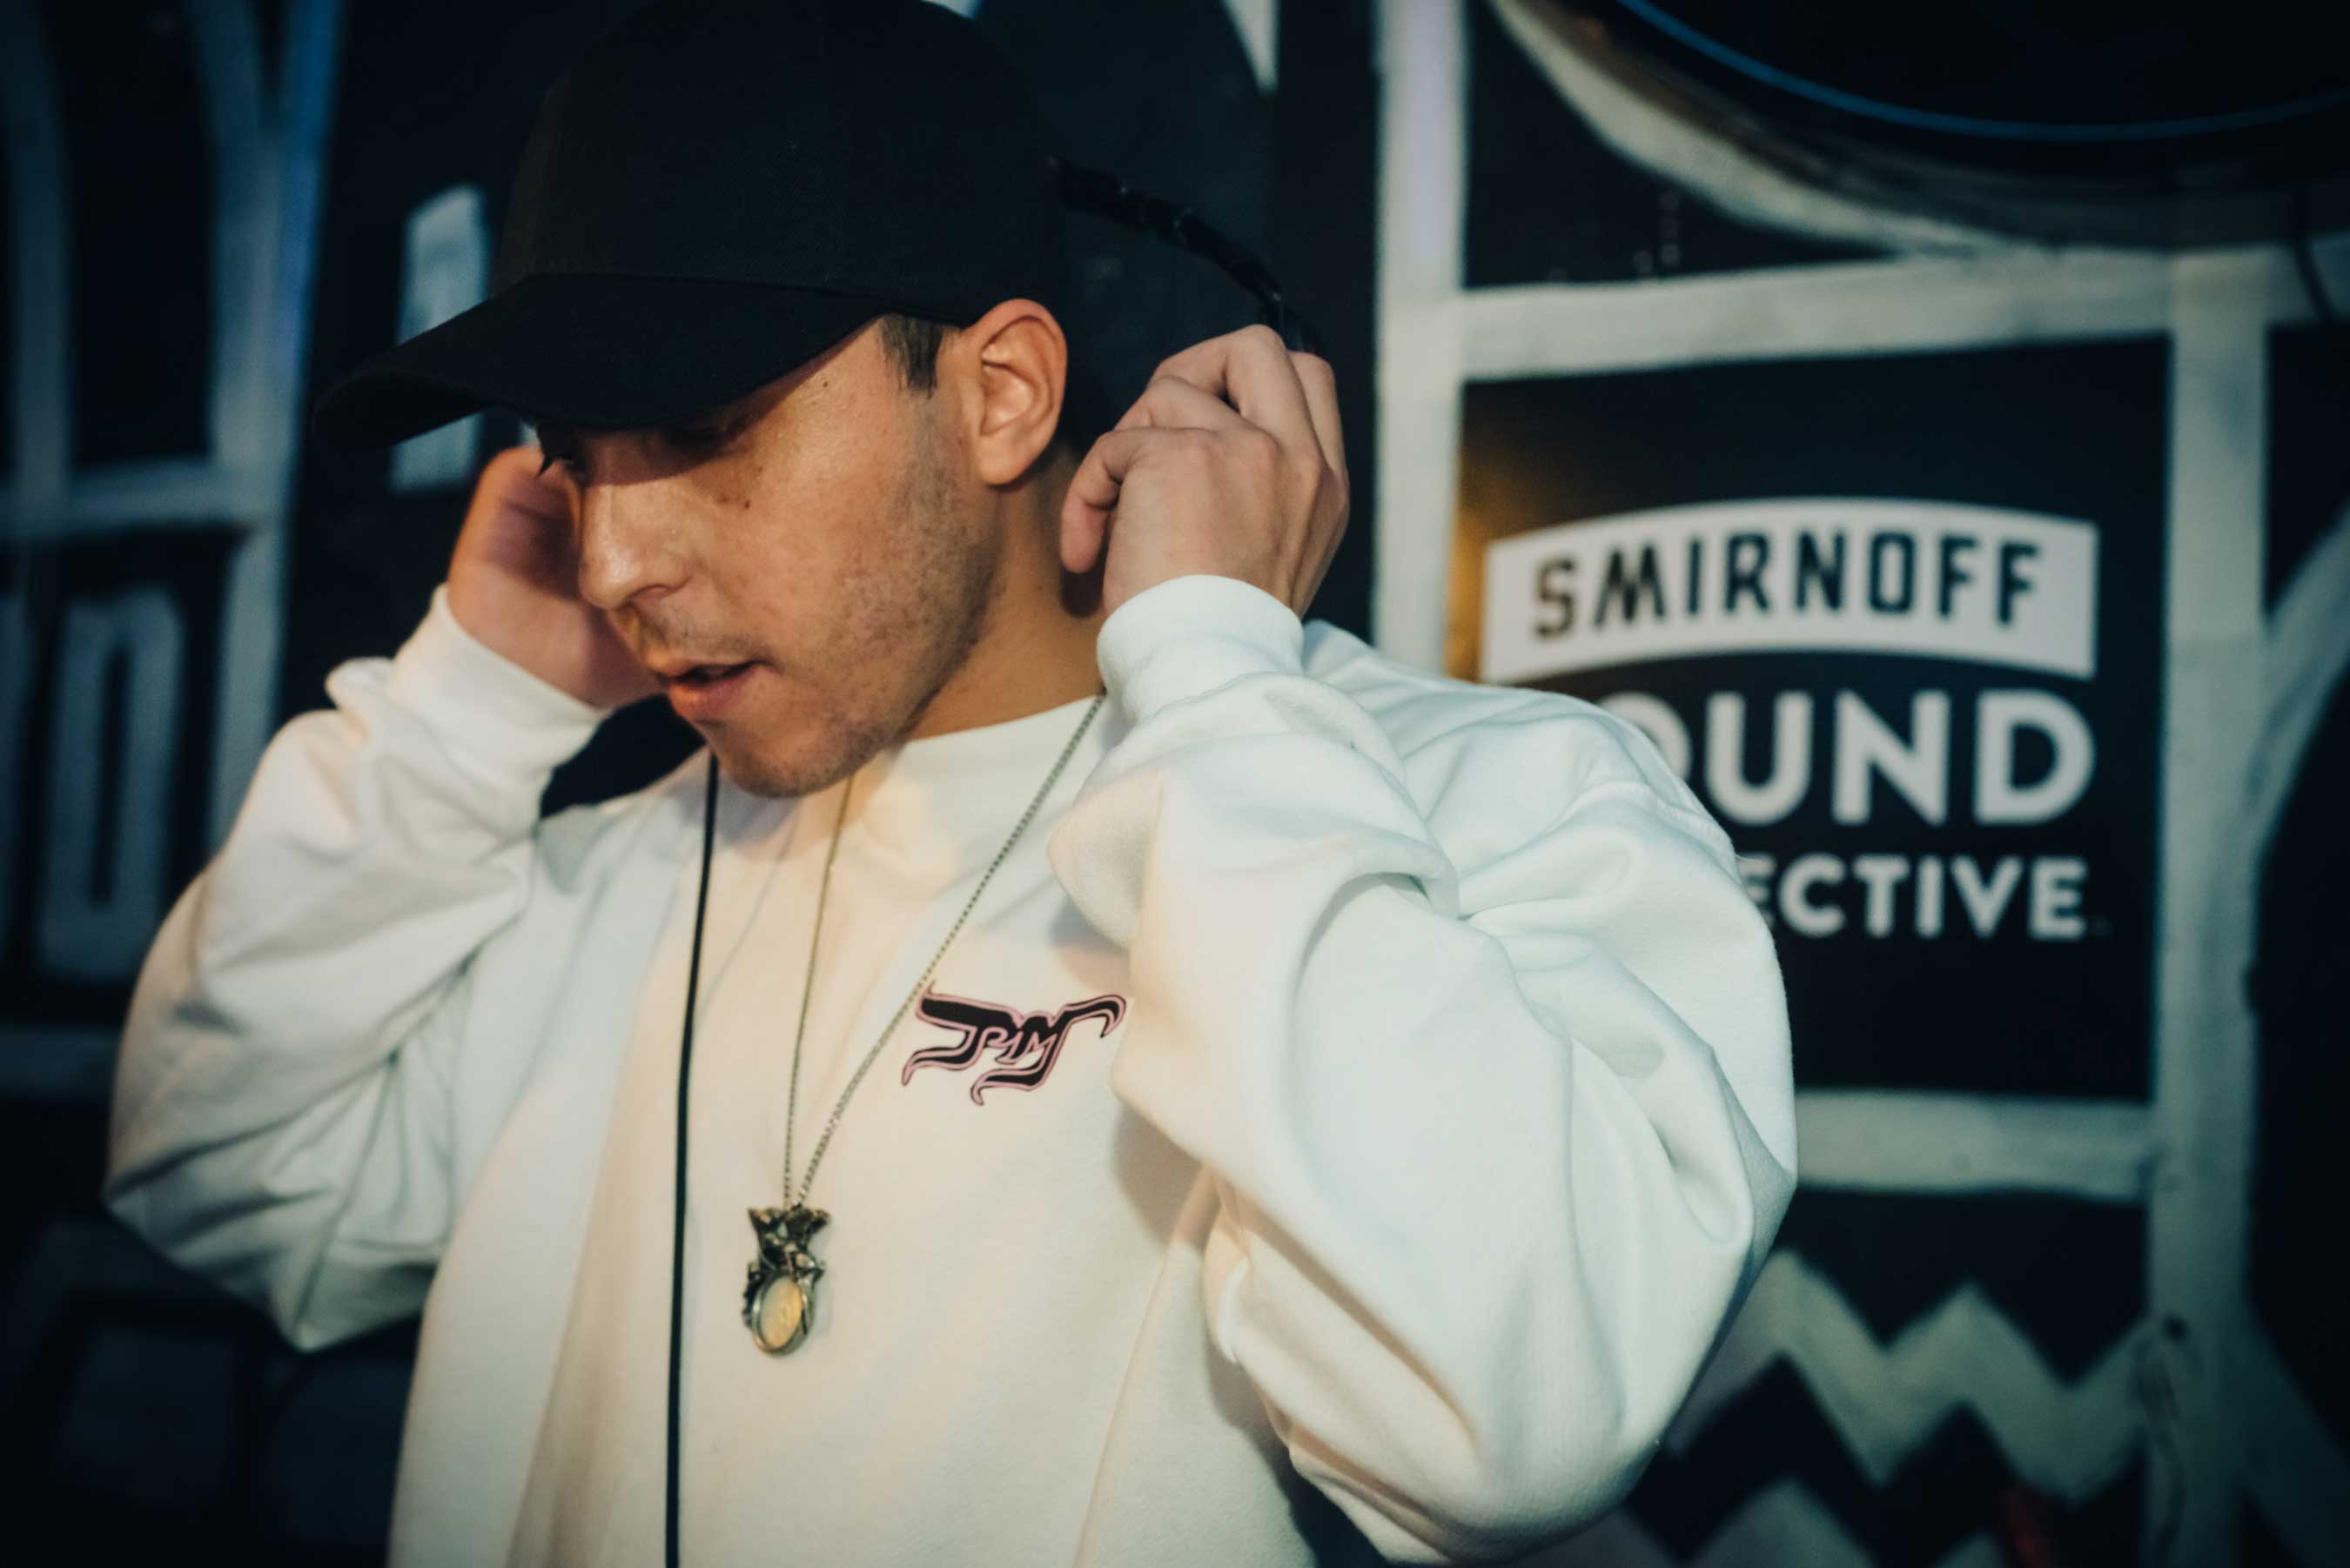 NAAFI co-founders premiere documentary at the Mixmag X Smirnoff Sound Collective Sound Lab in Brooklyn, NY